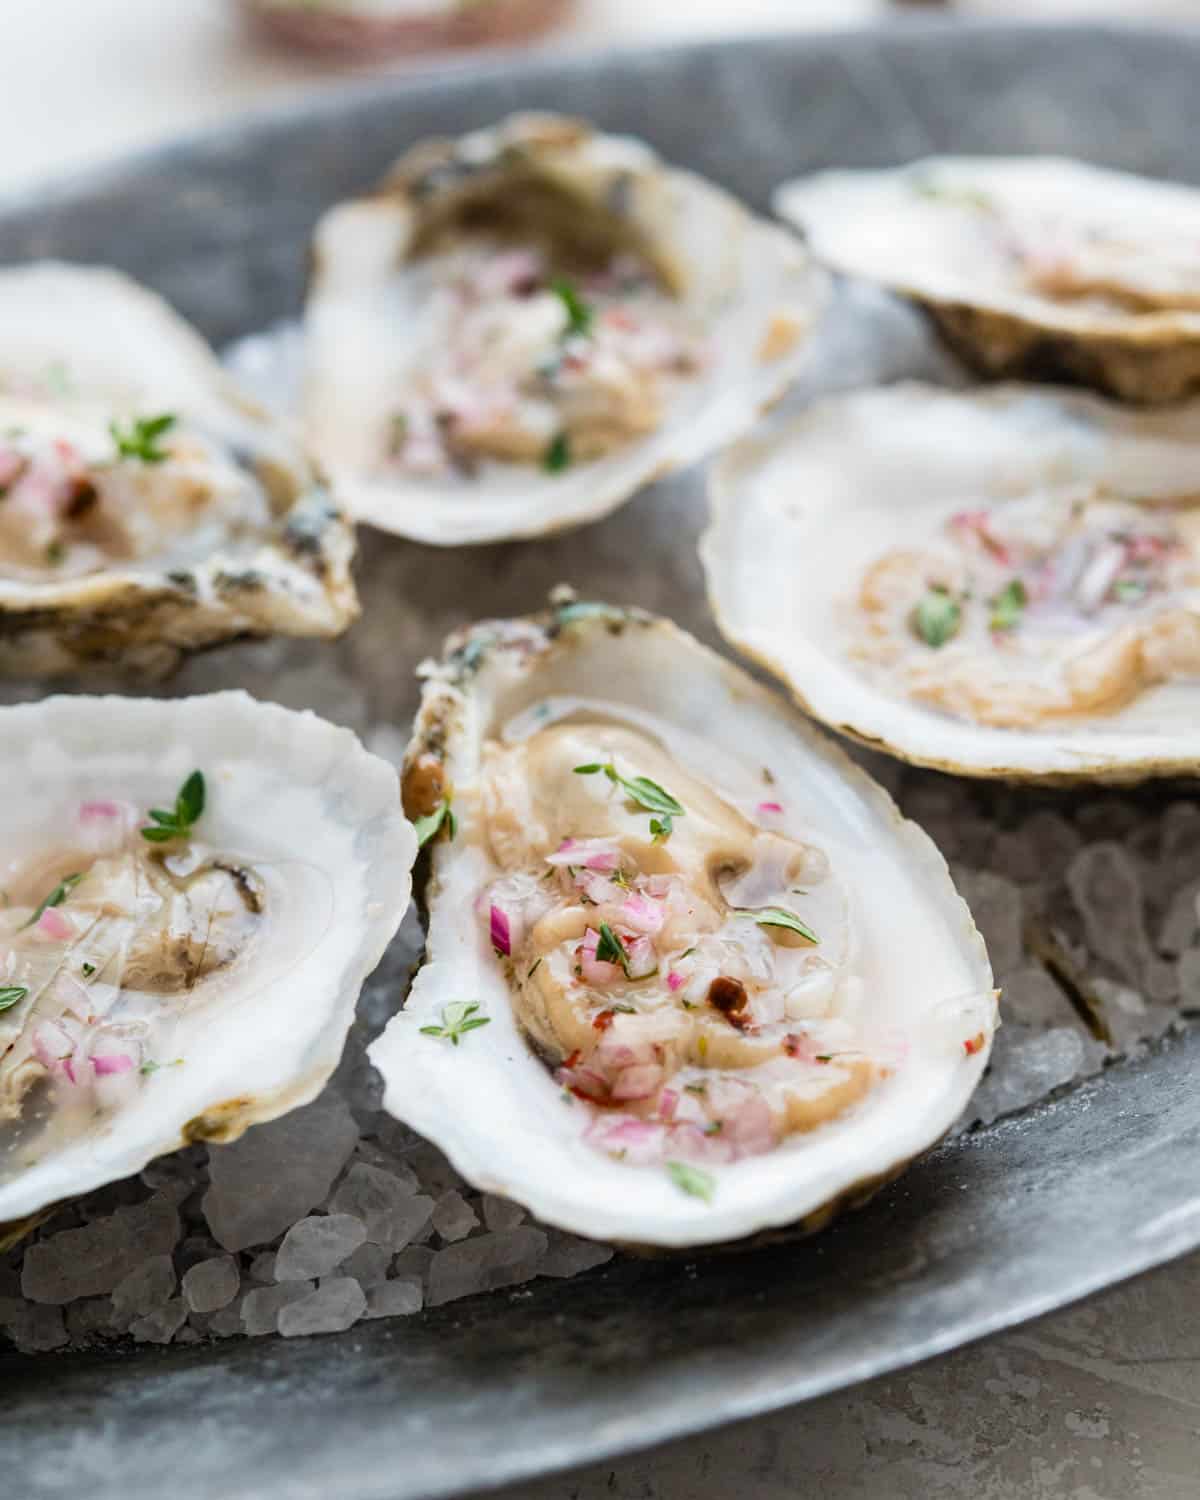 A closeup of the half shell oysters on a bed of rock salt.